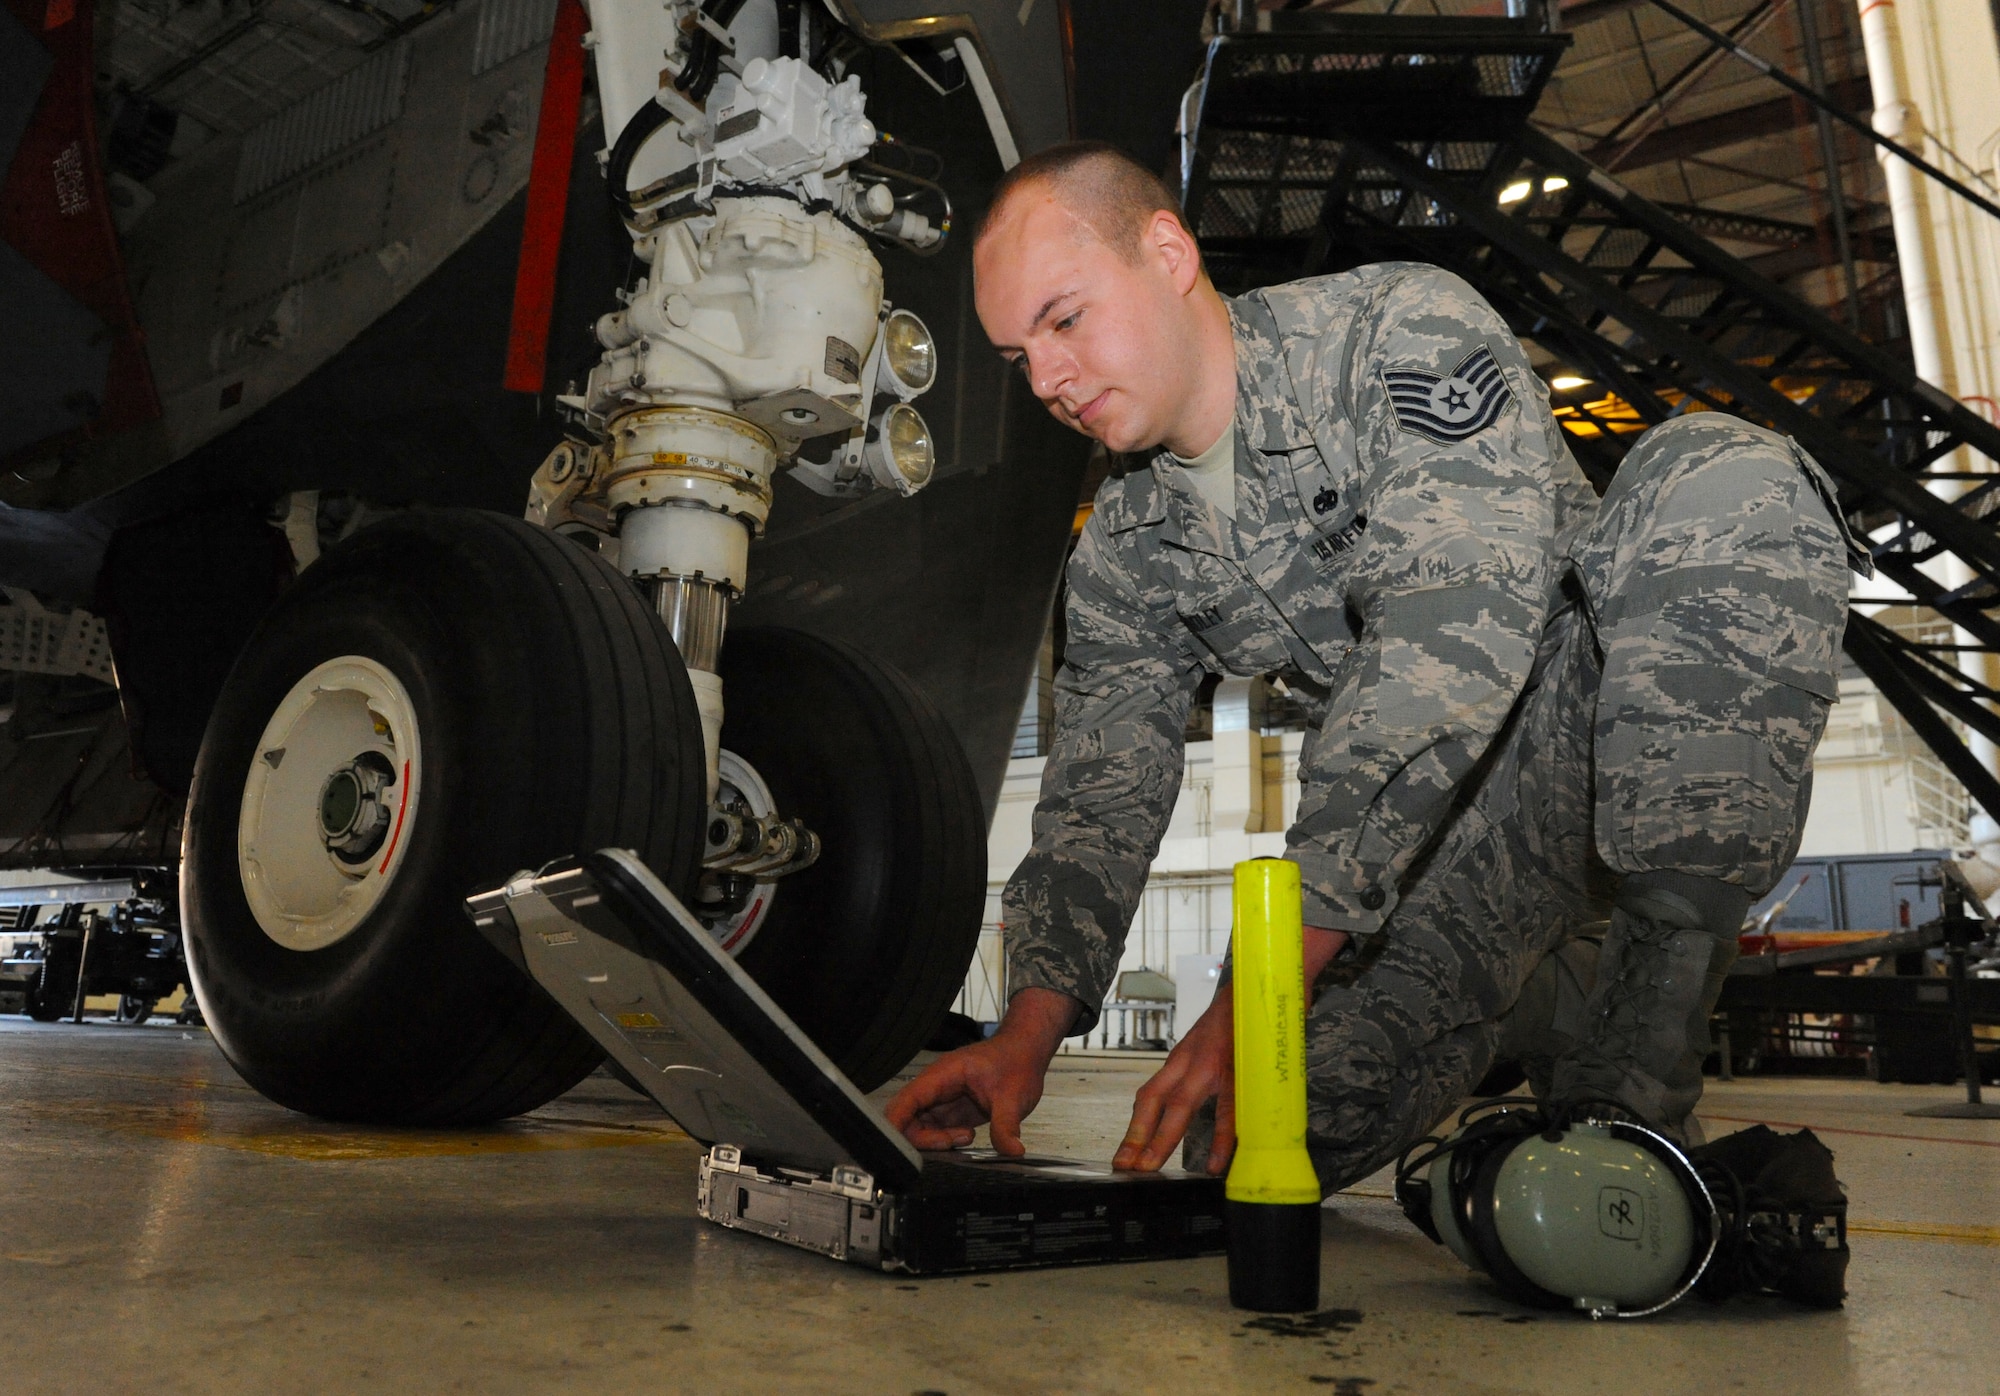 U.S. Air Force Tech Sgt. Aaron Bradley, a 393d Aircraft Maintenance Unit specialist section chief, reviews technical orders prior to maintenance work on a B-2 Spirit at Whiteman Air Force Base, Mo., Feb. 18, 2016. As the specialist section chief, Bradley has oversight of over 80 personnel of the aircraft hydraulics section, propulsion section and electrical and environmental section. Bradley is also responsible for the maintenance of the 4,000 psi hydraulic system which operates the B-2 flight controls, landing gear, brakes, steering and weapon systems.  The maintenance performed by the hydraulics section ensures the B-2 is mission ready. (U.S. Air Force photo by Tech. Sgt. Miguel Lara III)